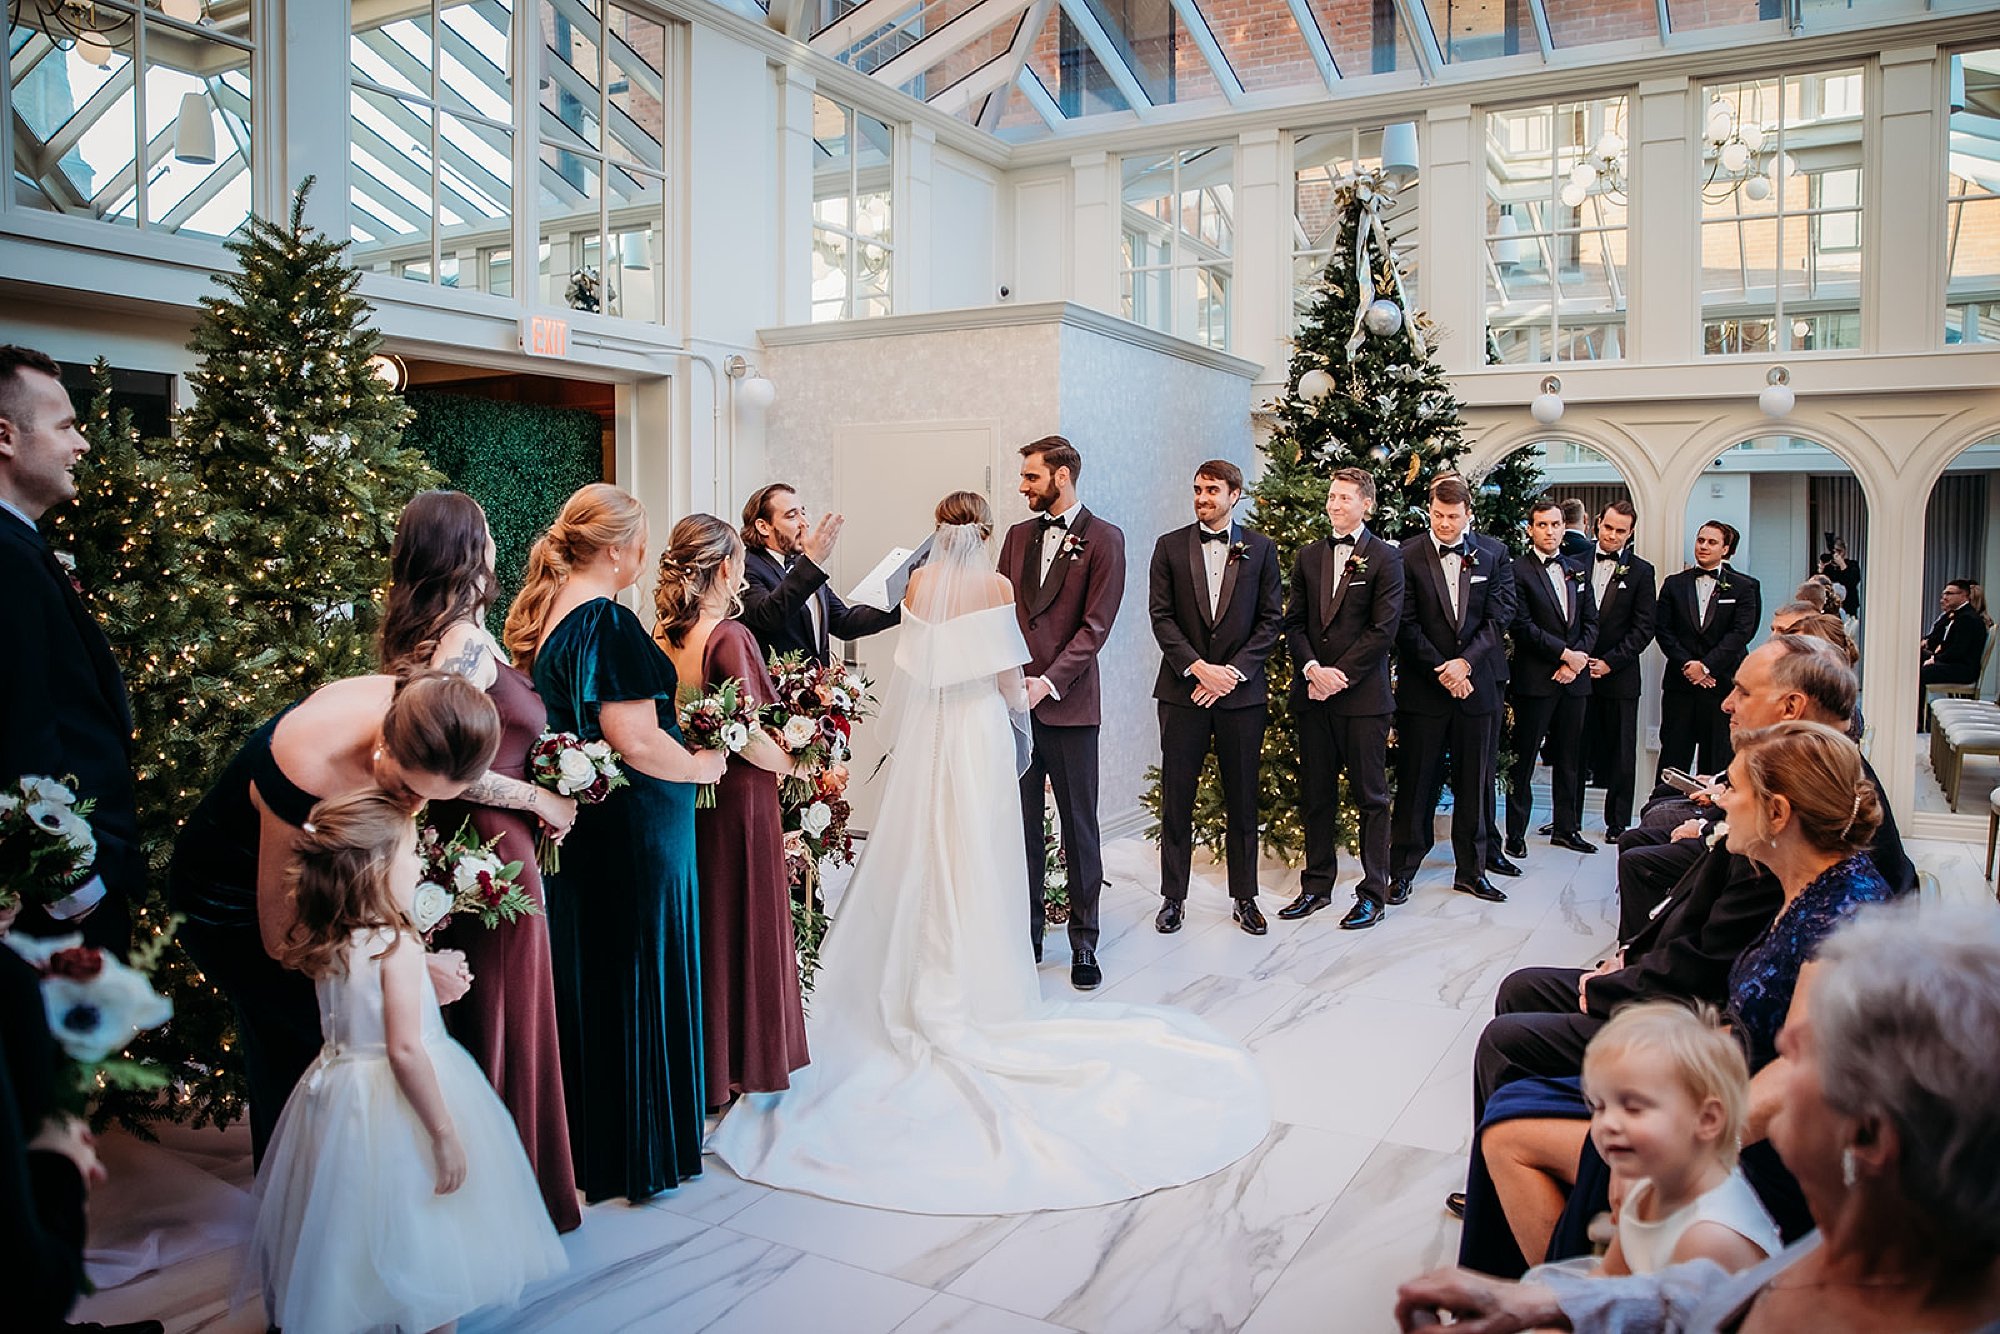 bride and groom exchange vows during wedding ceremony in atrium at The Adelphi Hotel in Saratoga Springs NY